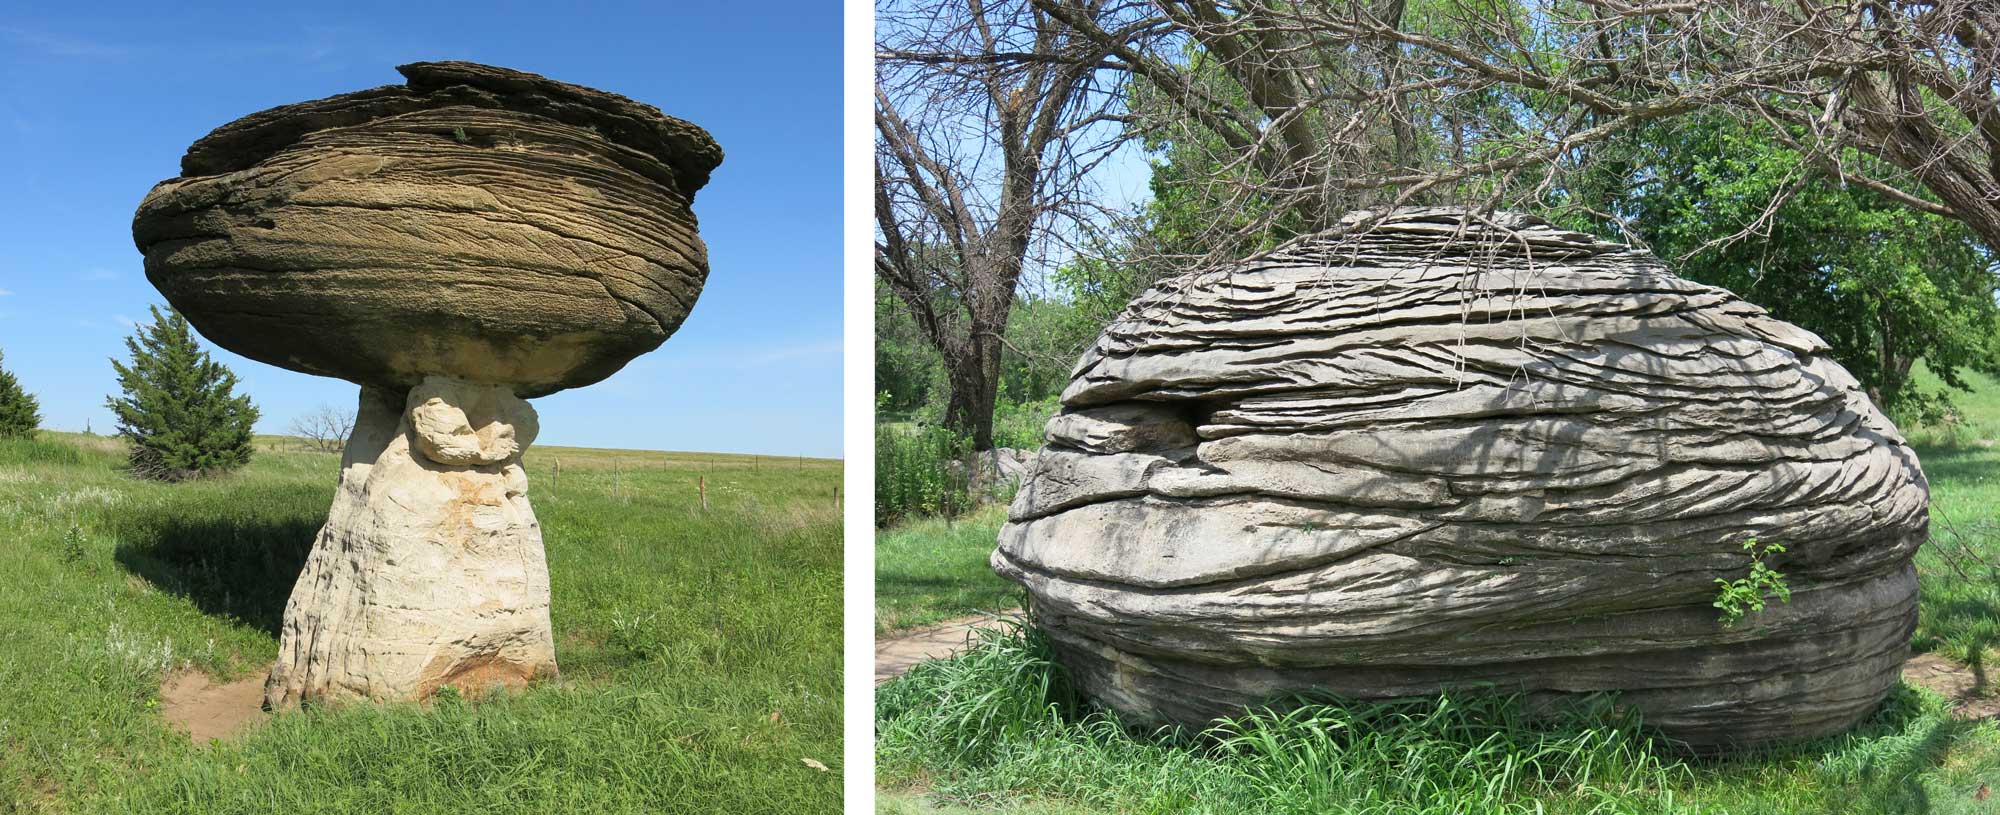 Two photographs of rock formations at Mushroom Rocks State Park in Kansas.